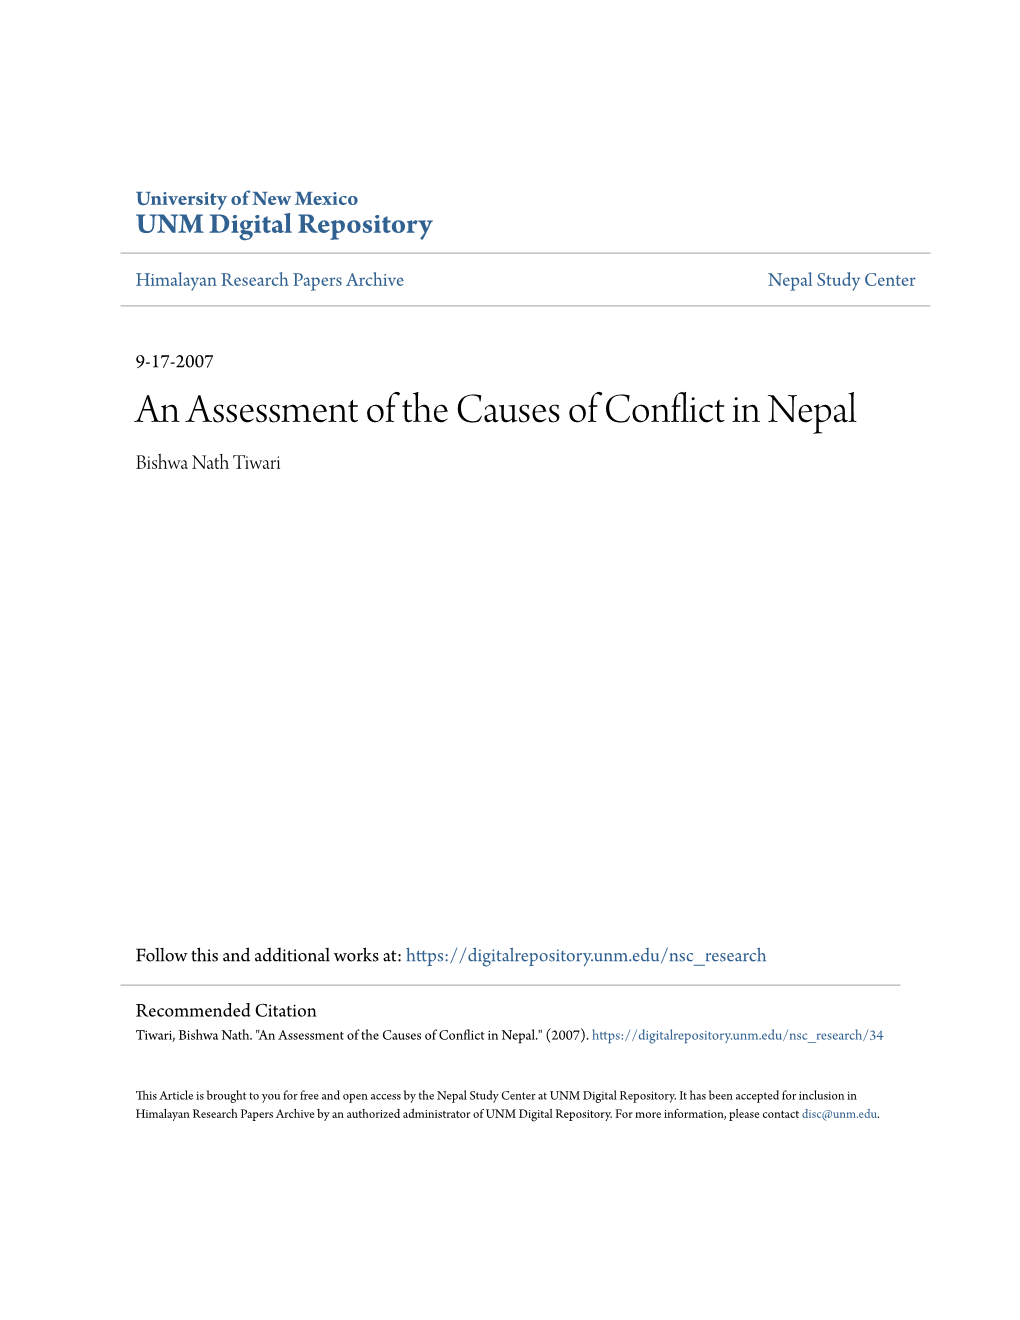 An Assessment of the Causes of Conflict in Nepal Bishwa Nath Tiwari